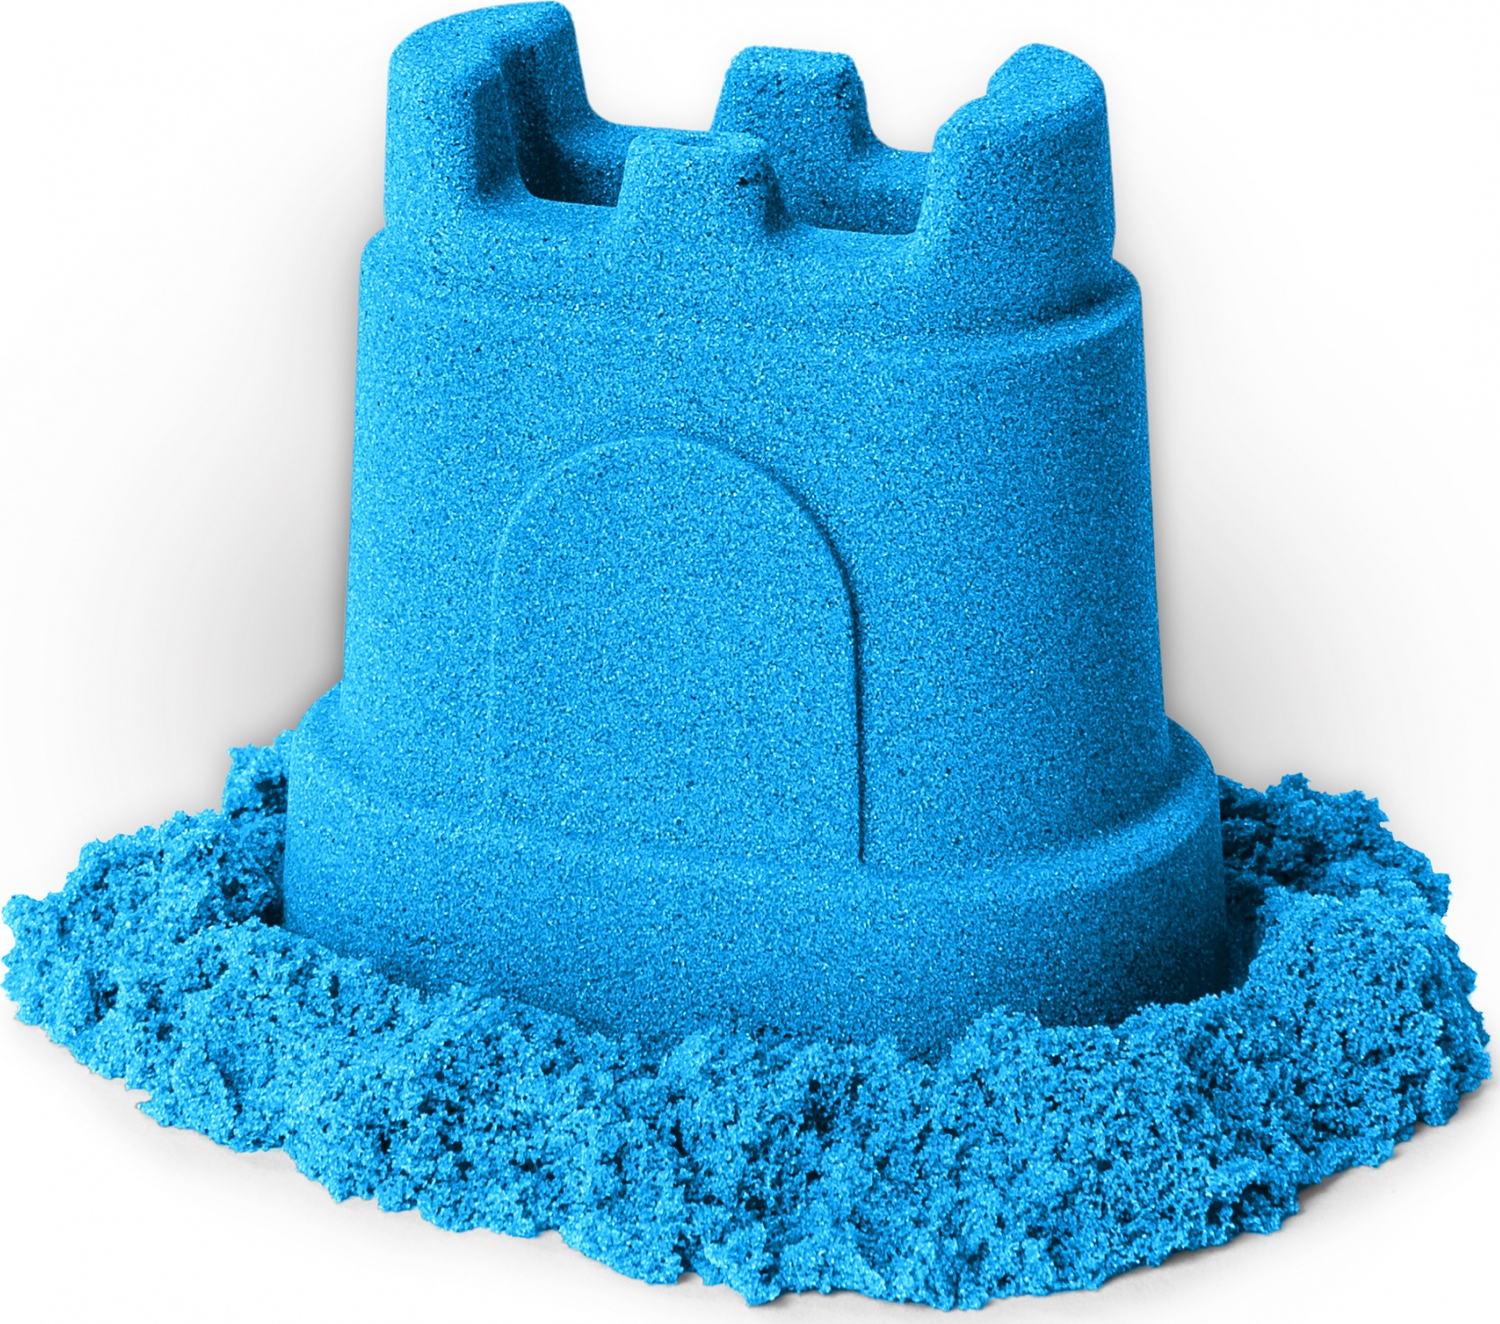 Kinetic Sand - Single Container - 4.5 oz - Blue